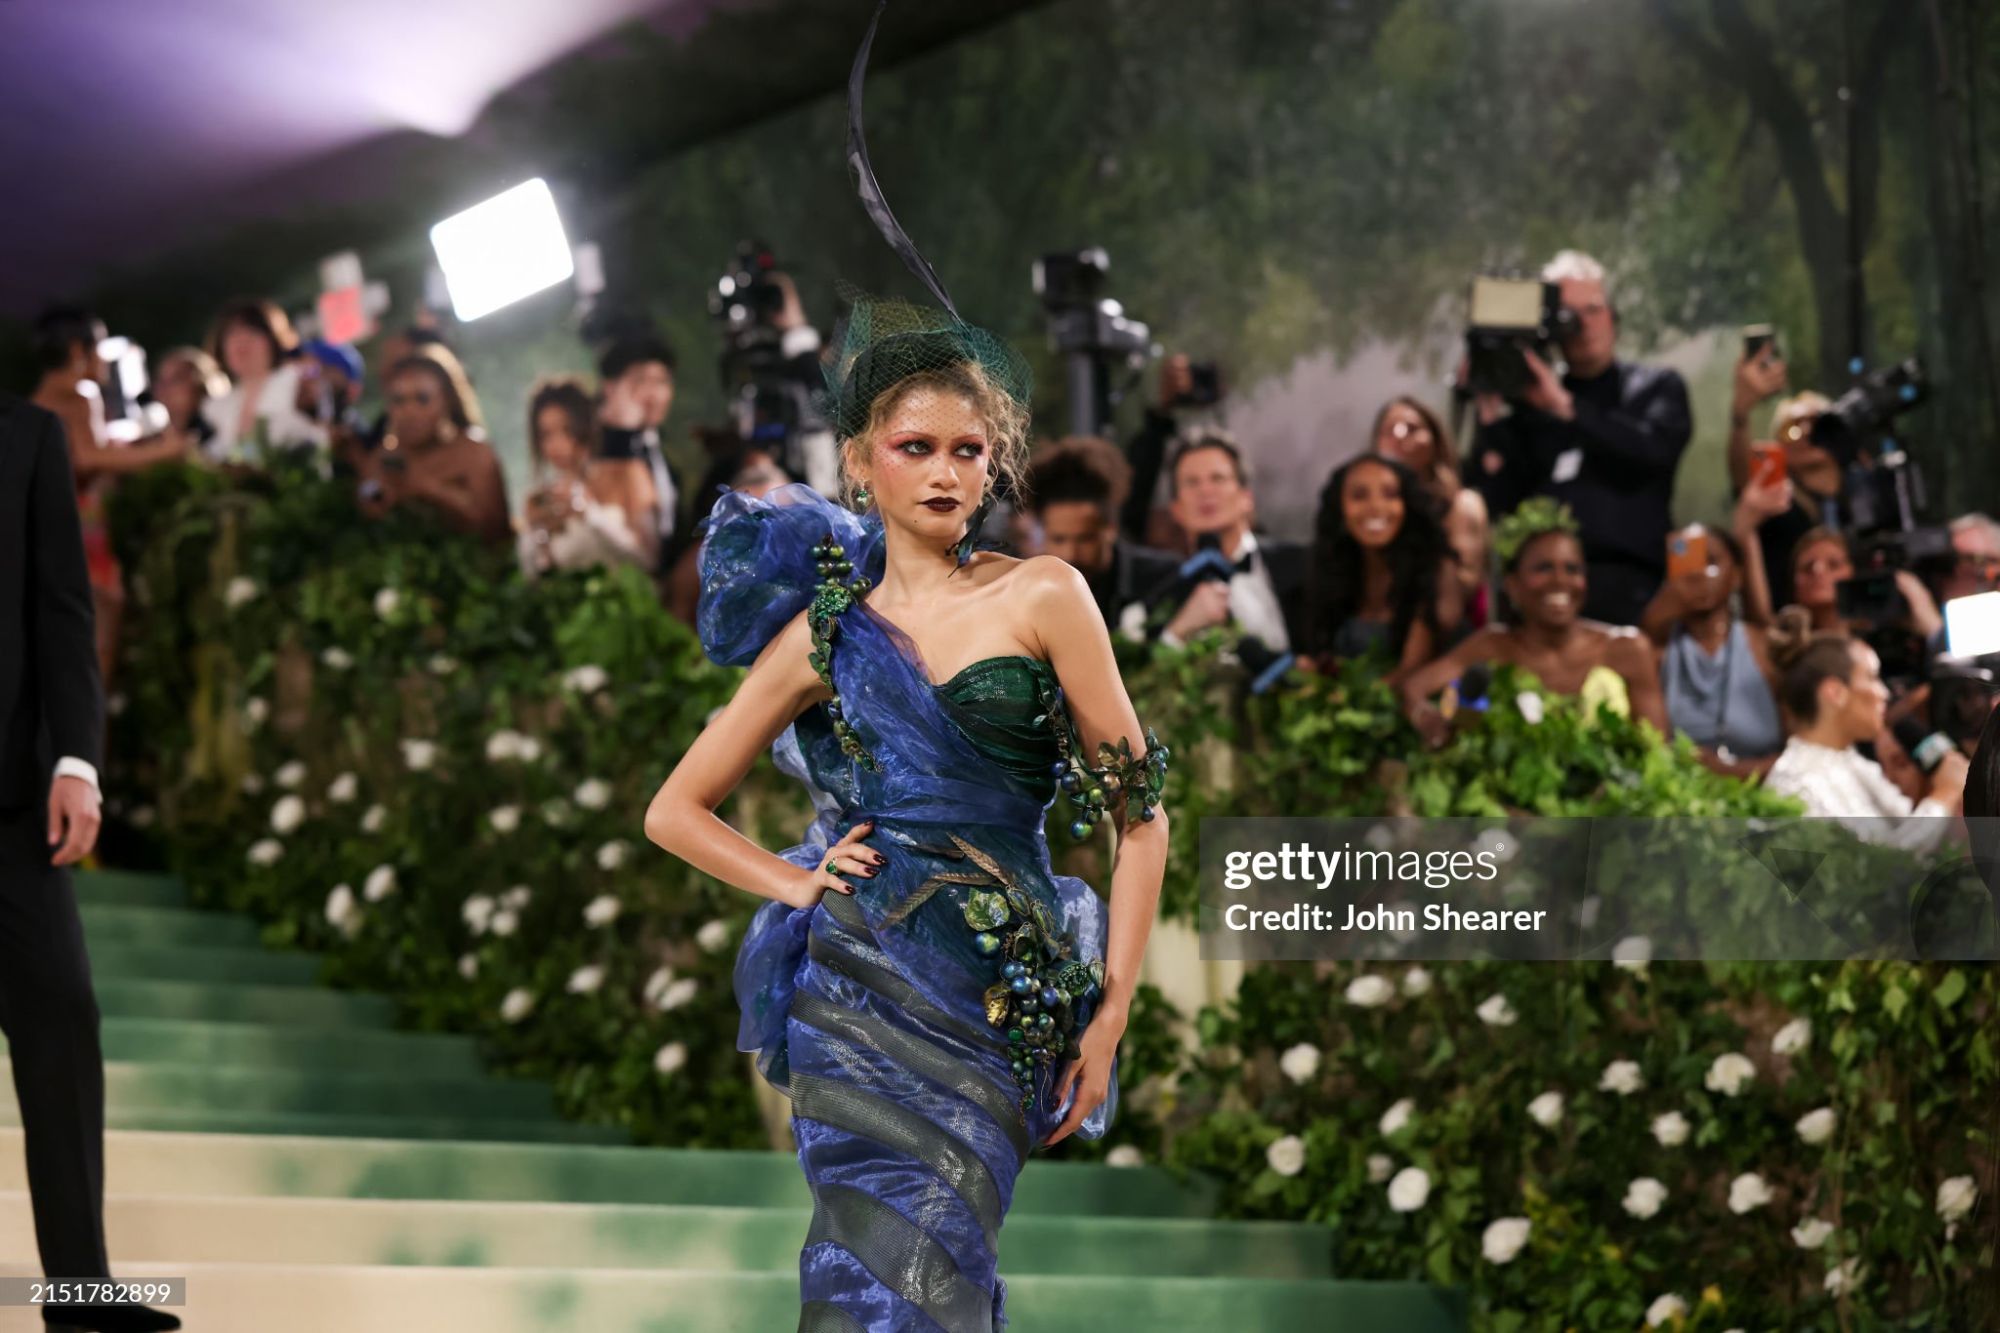 gettyimages-2151782899-2048x2048.jpg